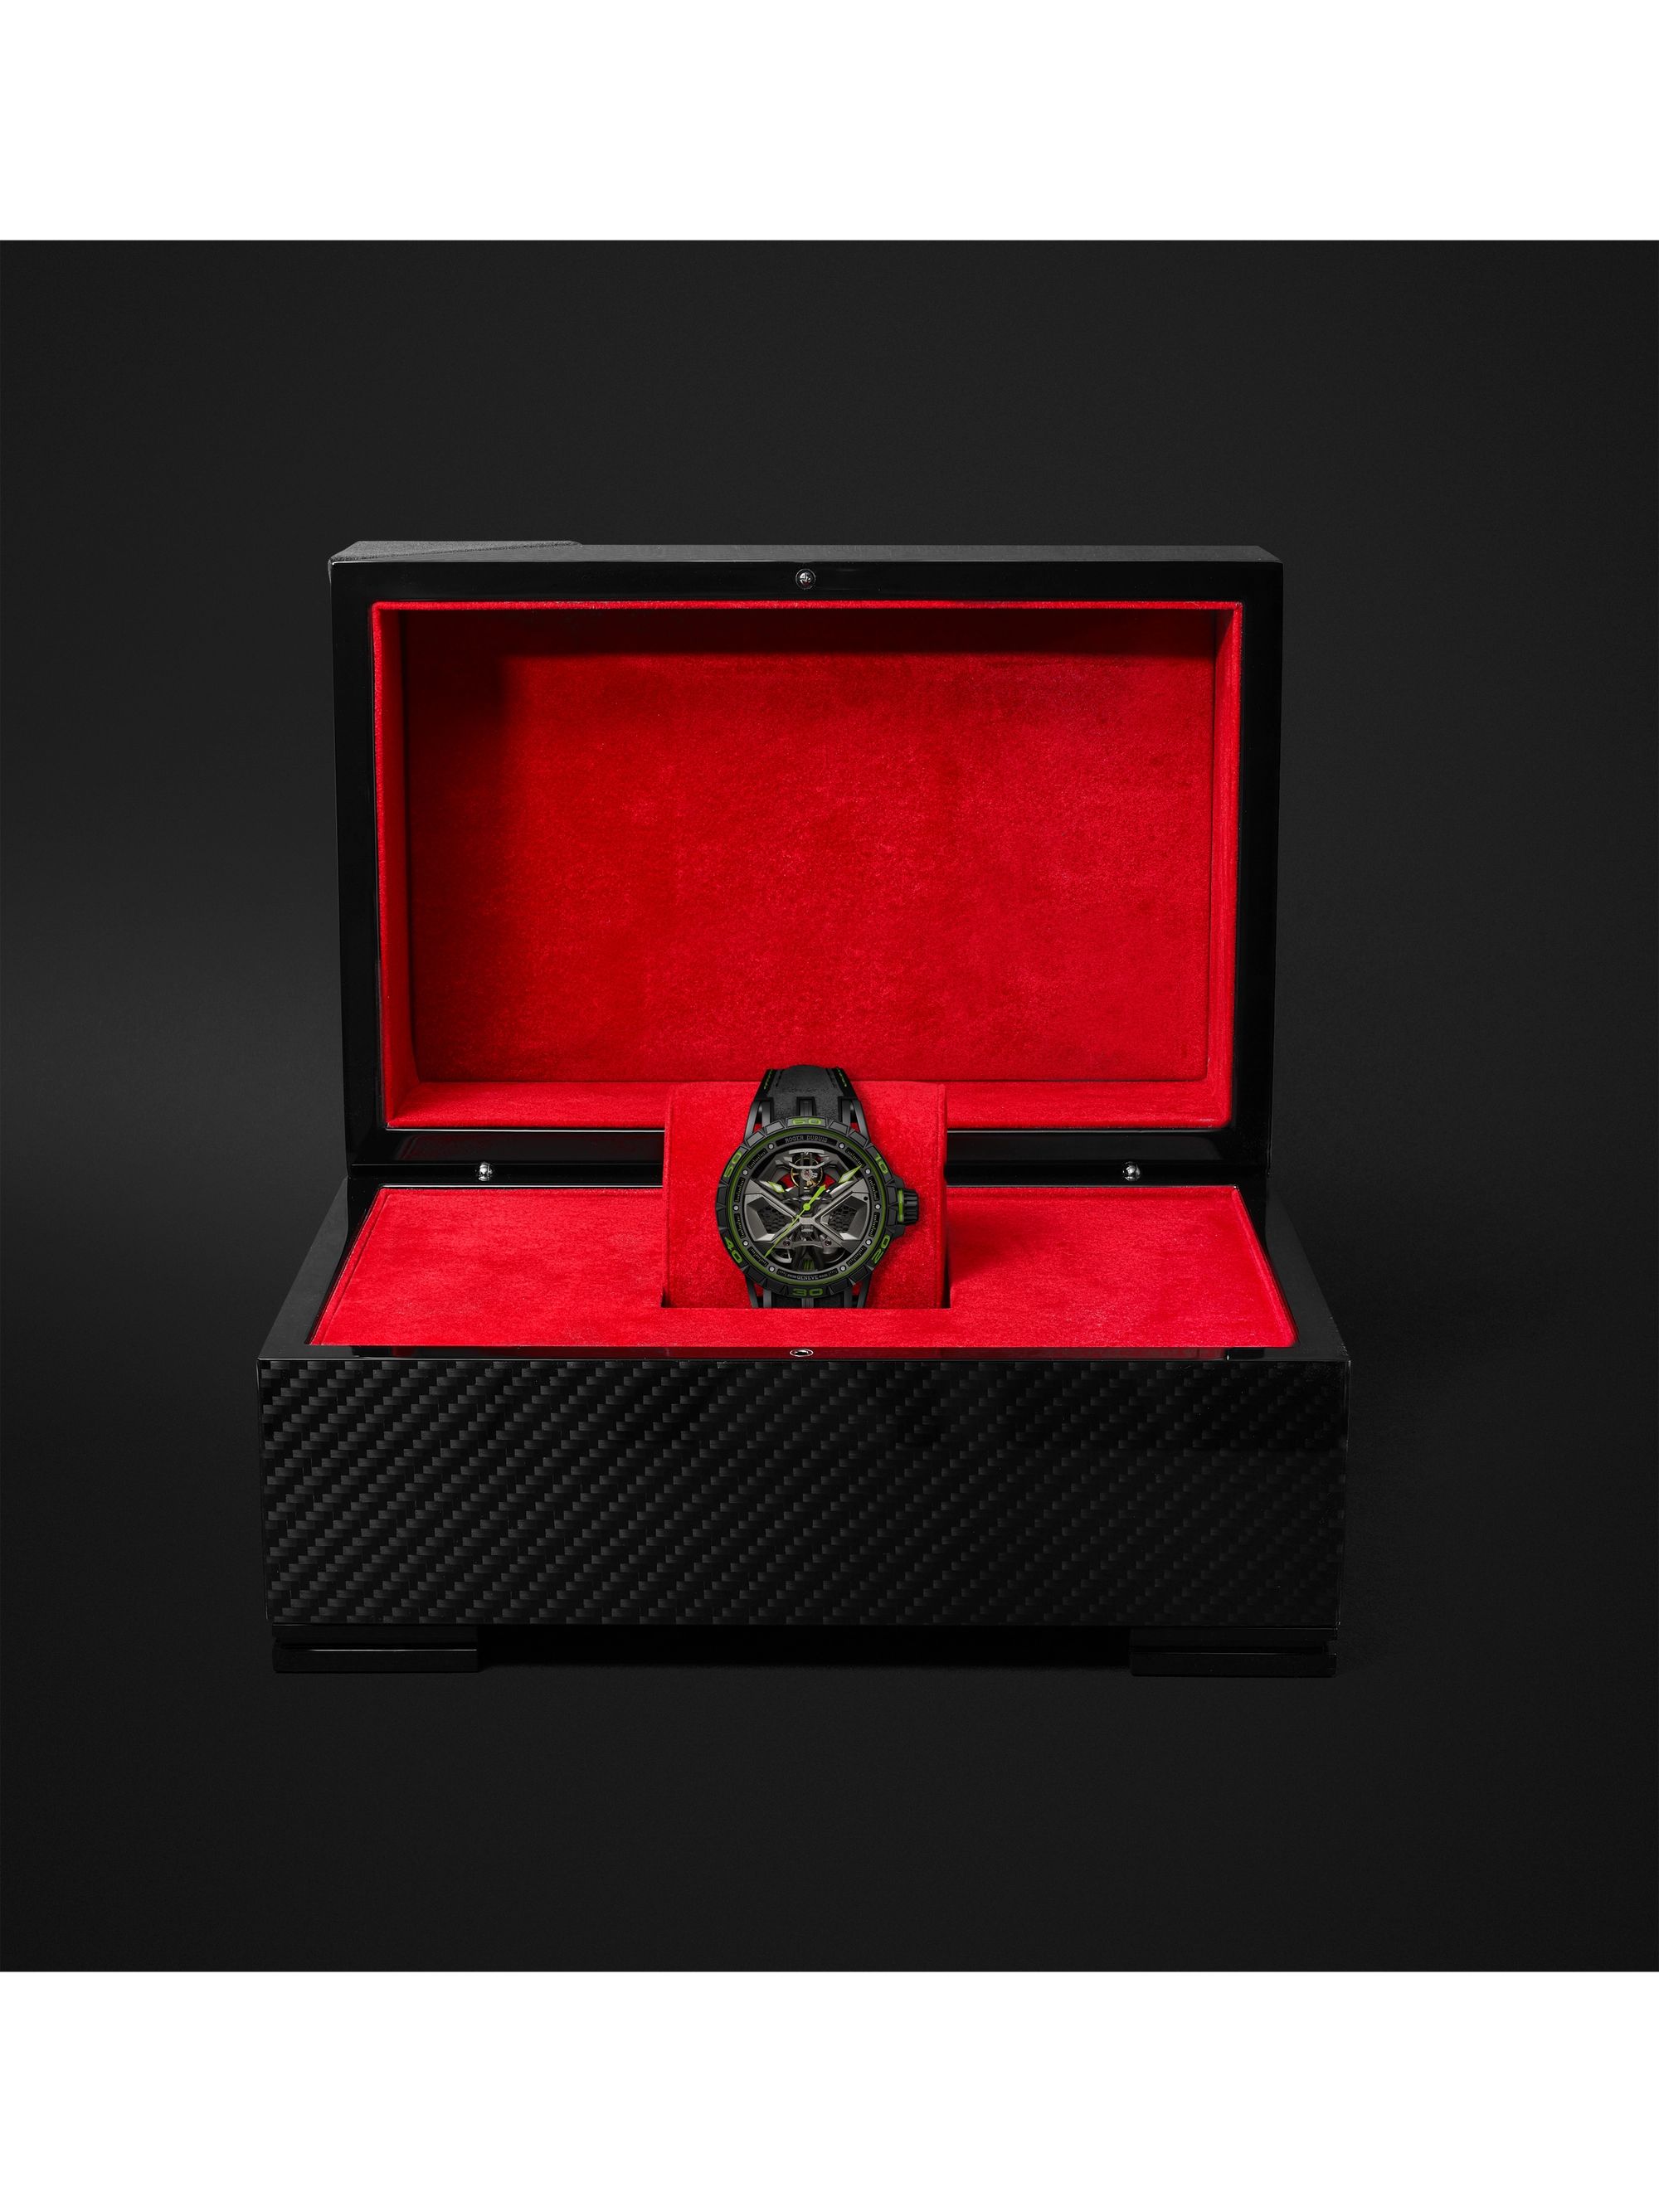 ROGER DUBUIS Excalibur Spider Huracán Grey Tech Automatic 45mm Titanium and Rubber Watch, Ref. No. RDDBEX0830